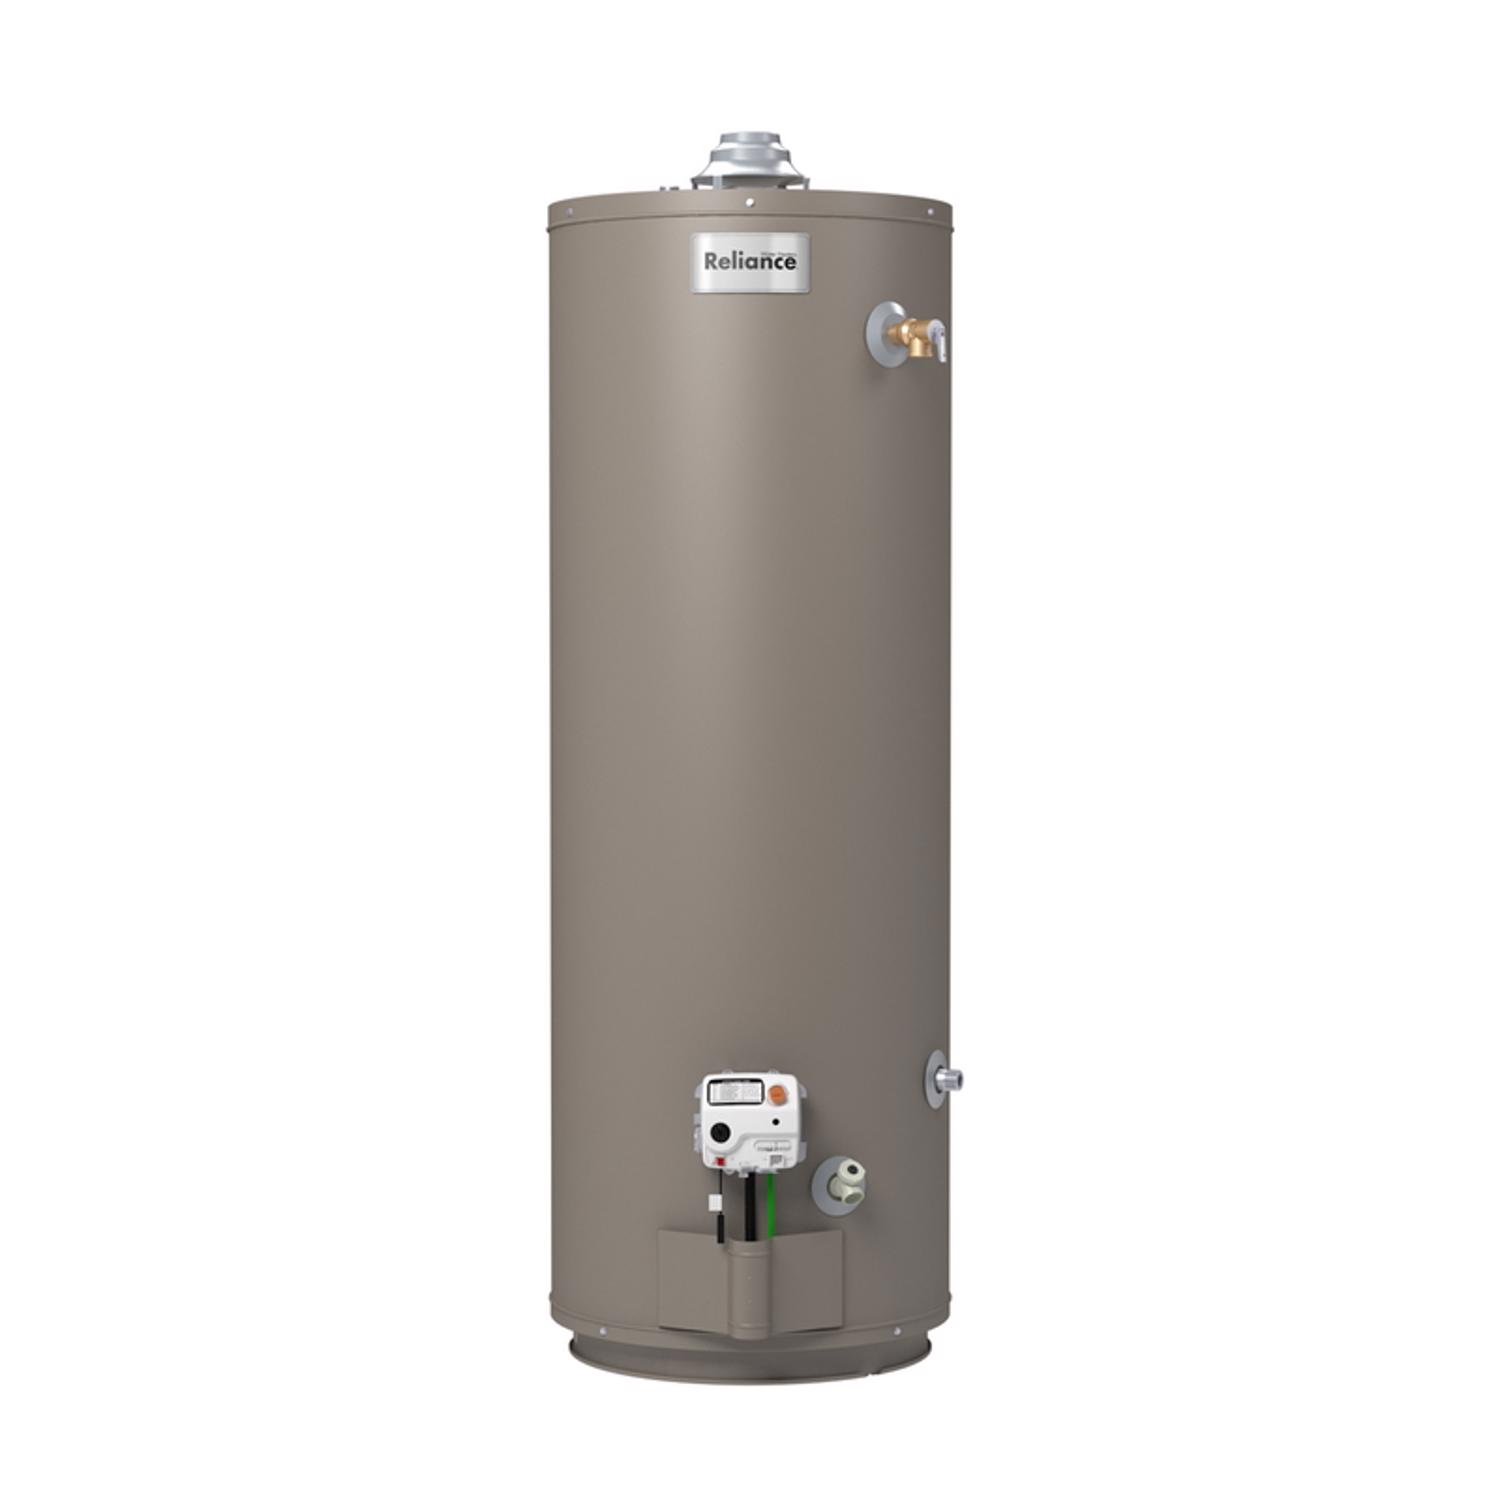 Reliance 30 gal 35500 BTU Natural Gas/Propane Mobile Home Water Heater -  6-30-NOMT